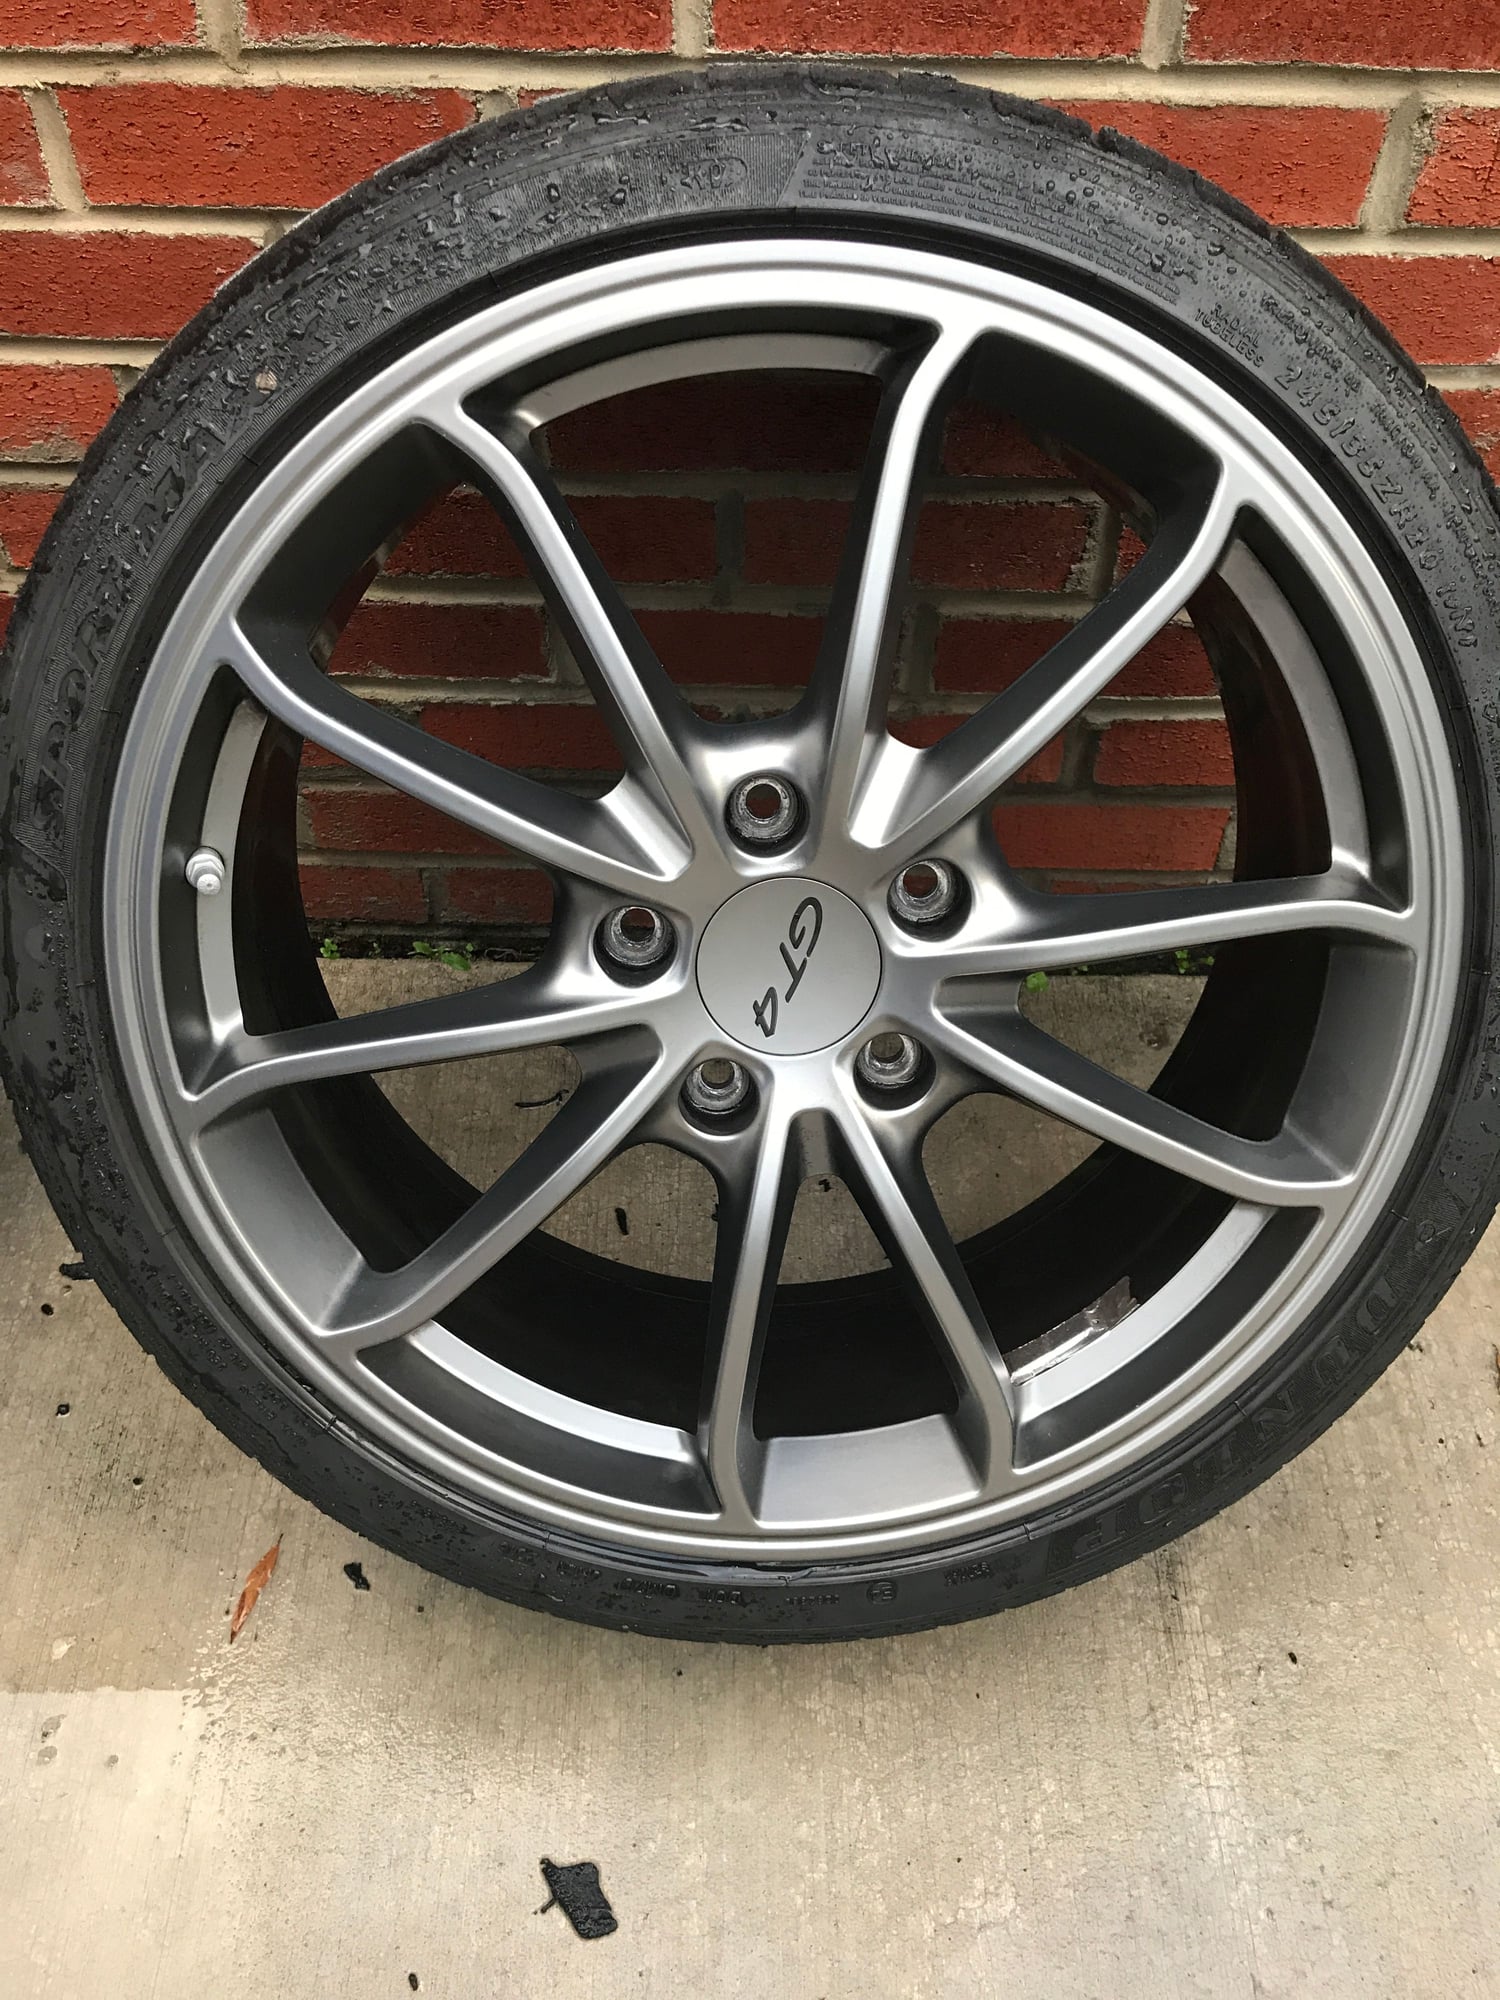 Wheels and Tires/Axles - OEM GT4 Wheels and Tires Platinum - Used - 2016 Porsche Cayman GT4 - Washington, DC 20007, United States